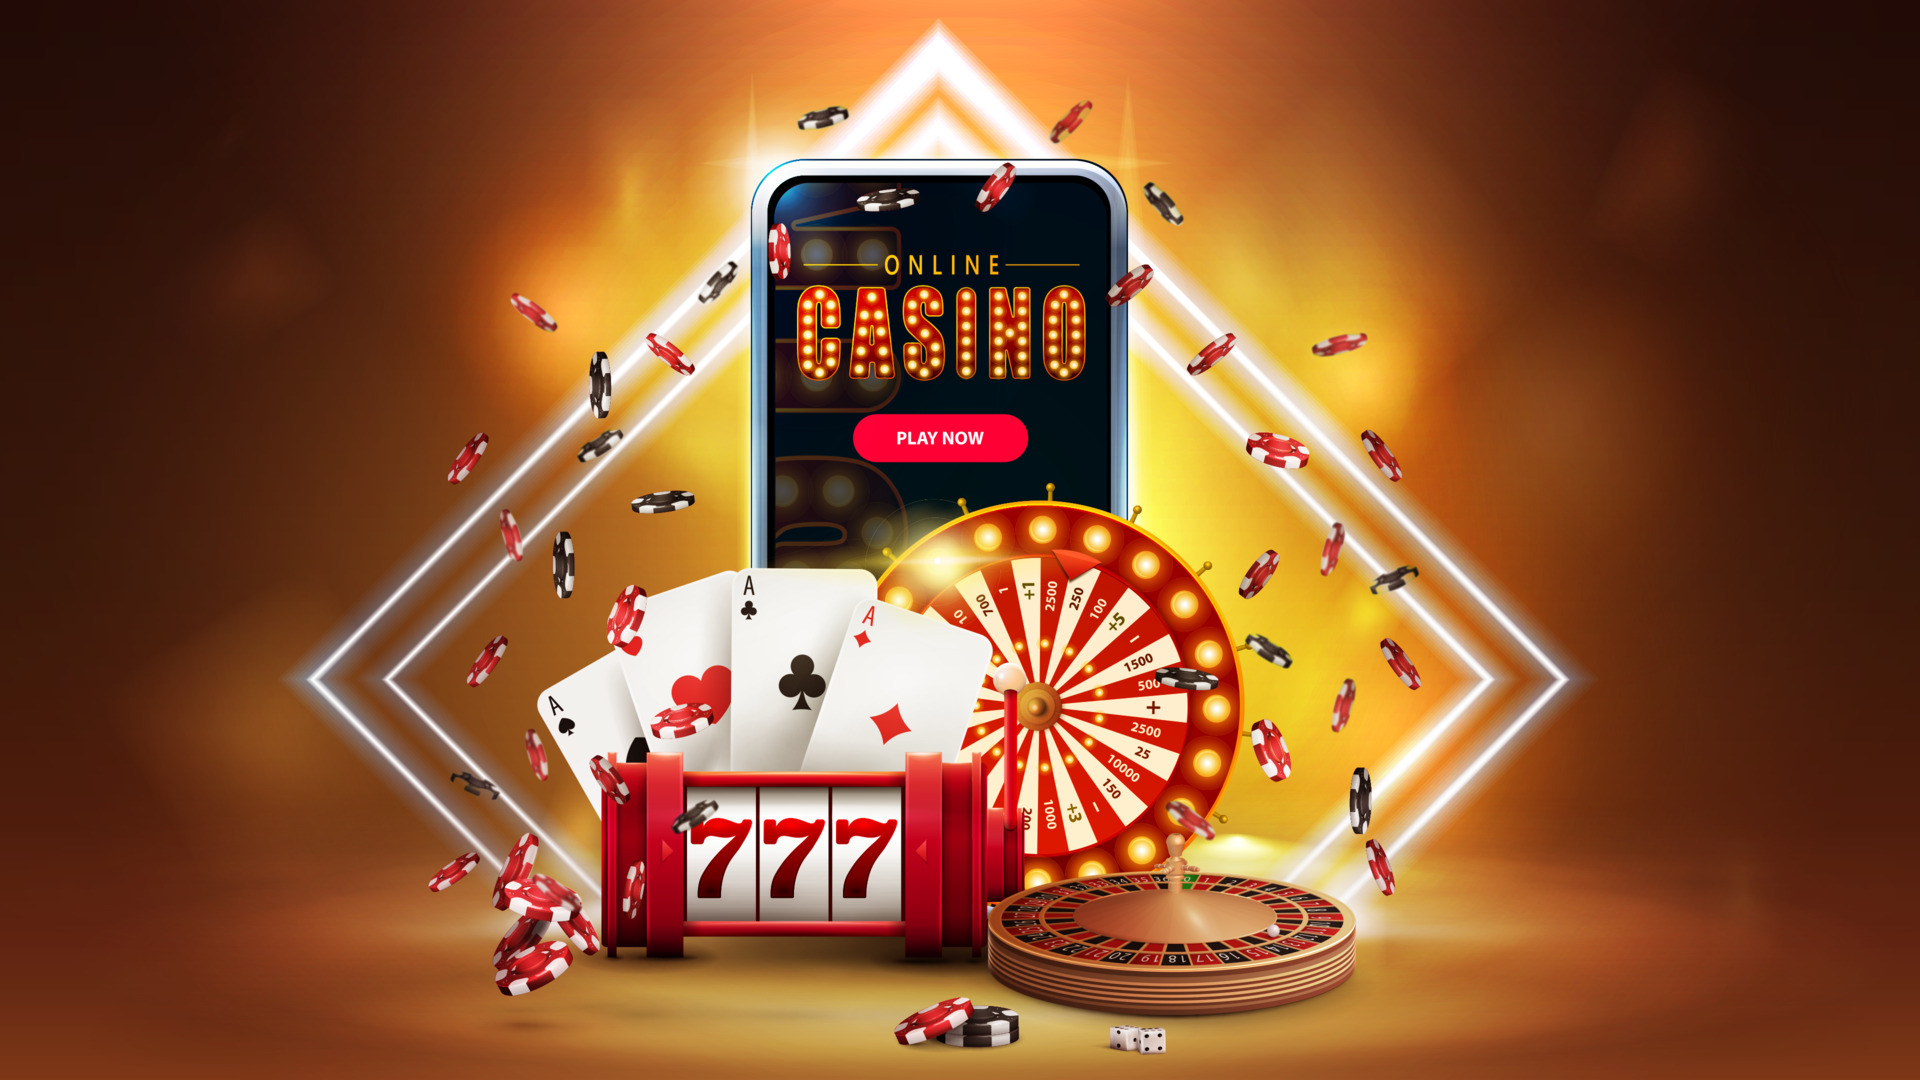 Fun Casino Hire to liven up your office party